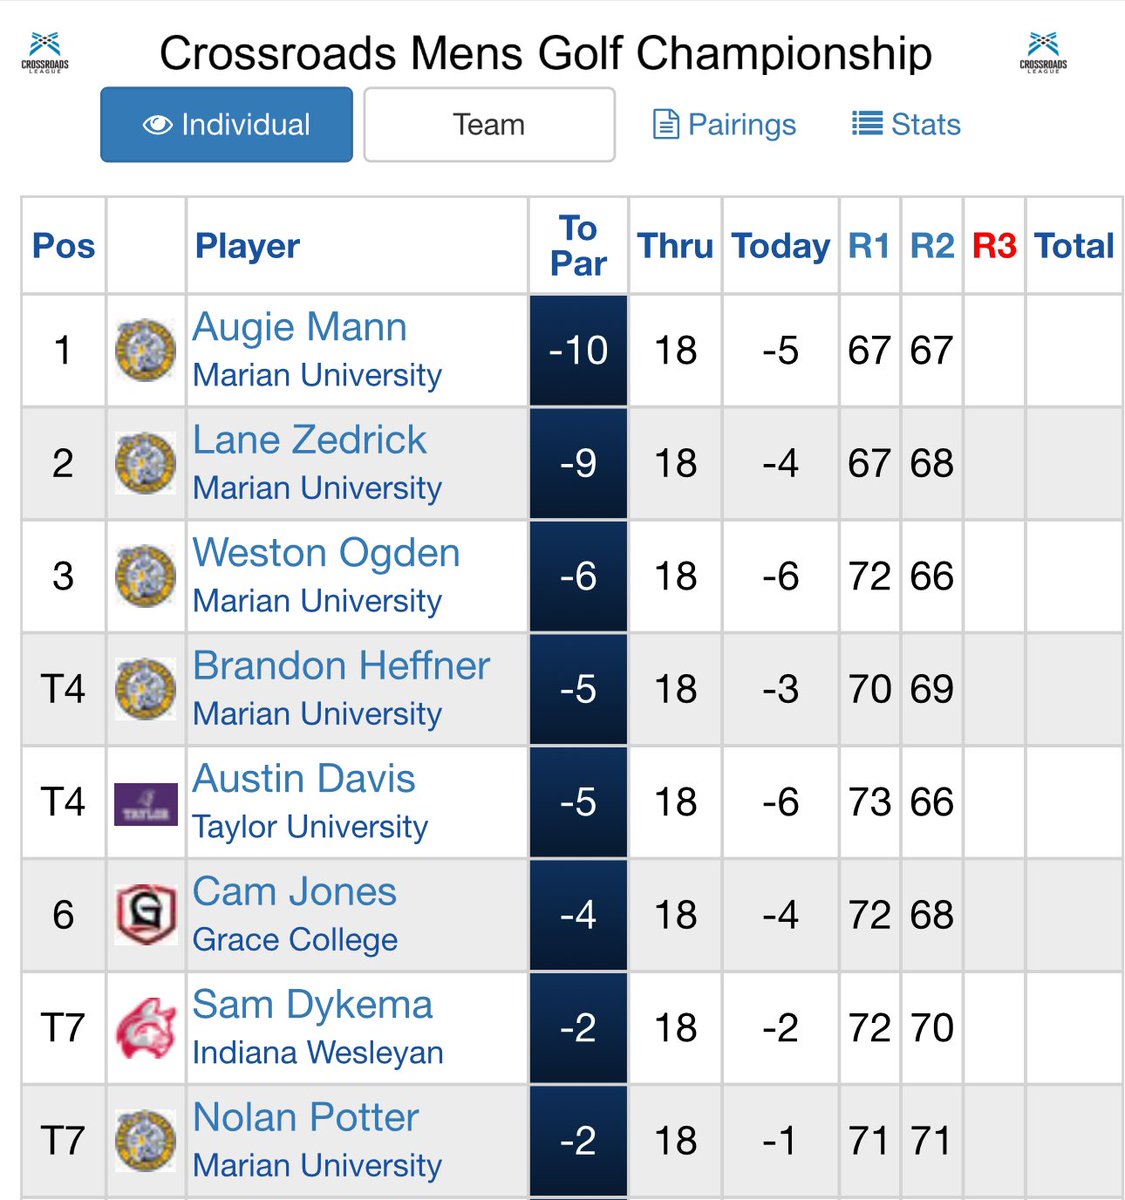 Knights have the top FOUR spots! @mann_augie2 leads after 36 holes, with @LaneZedrick1 one shot back! @weston_ogden is four shots back. Great scores all around! @Crossroads_NAIA @MUKnights